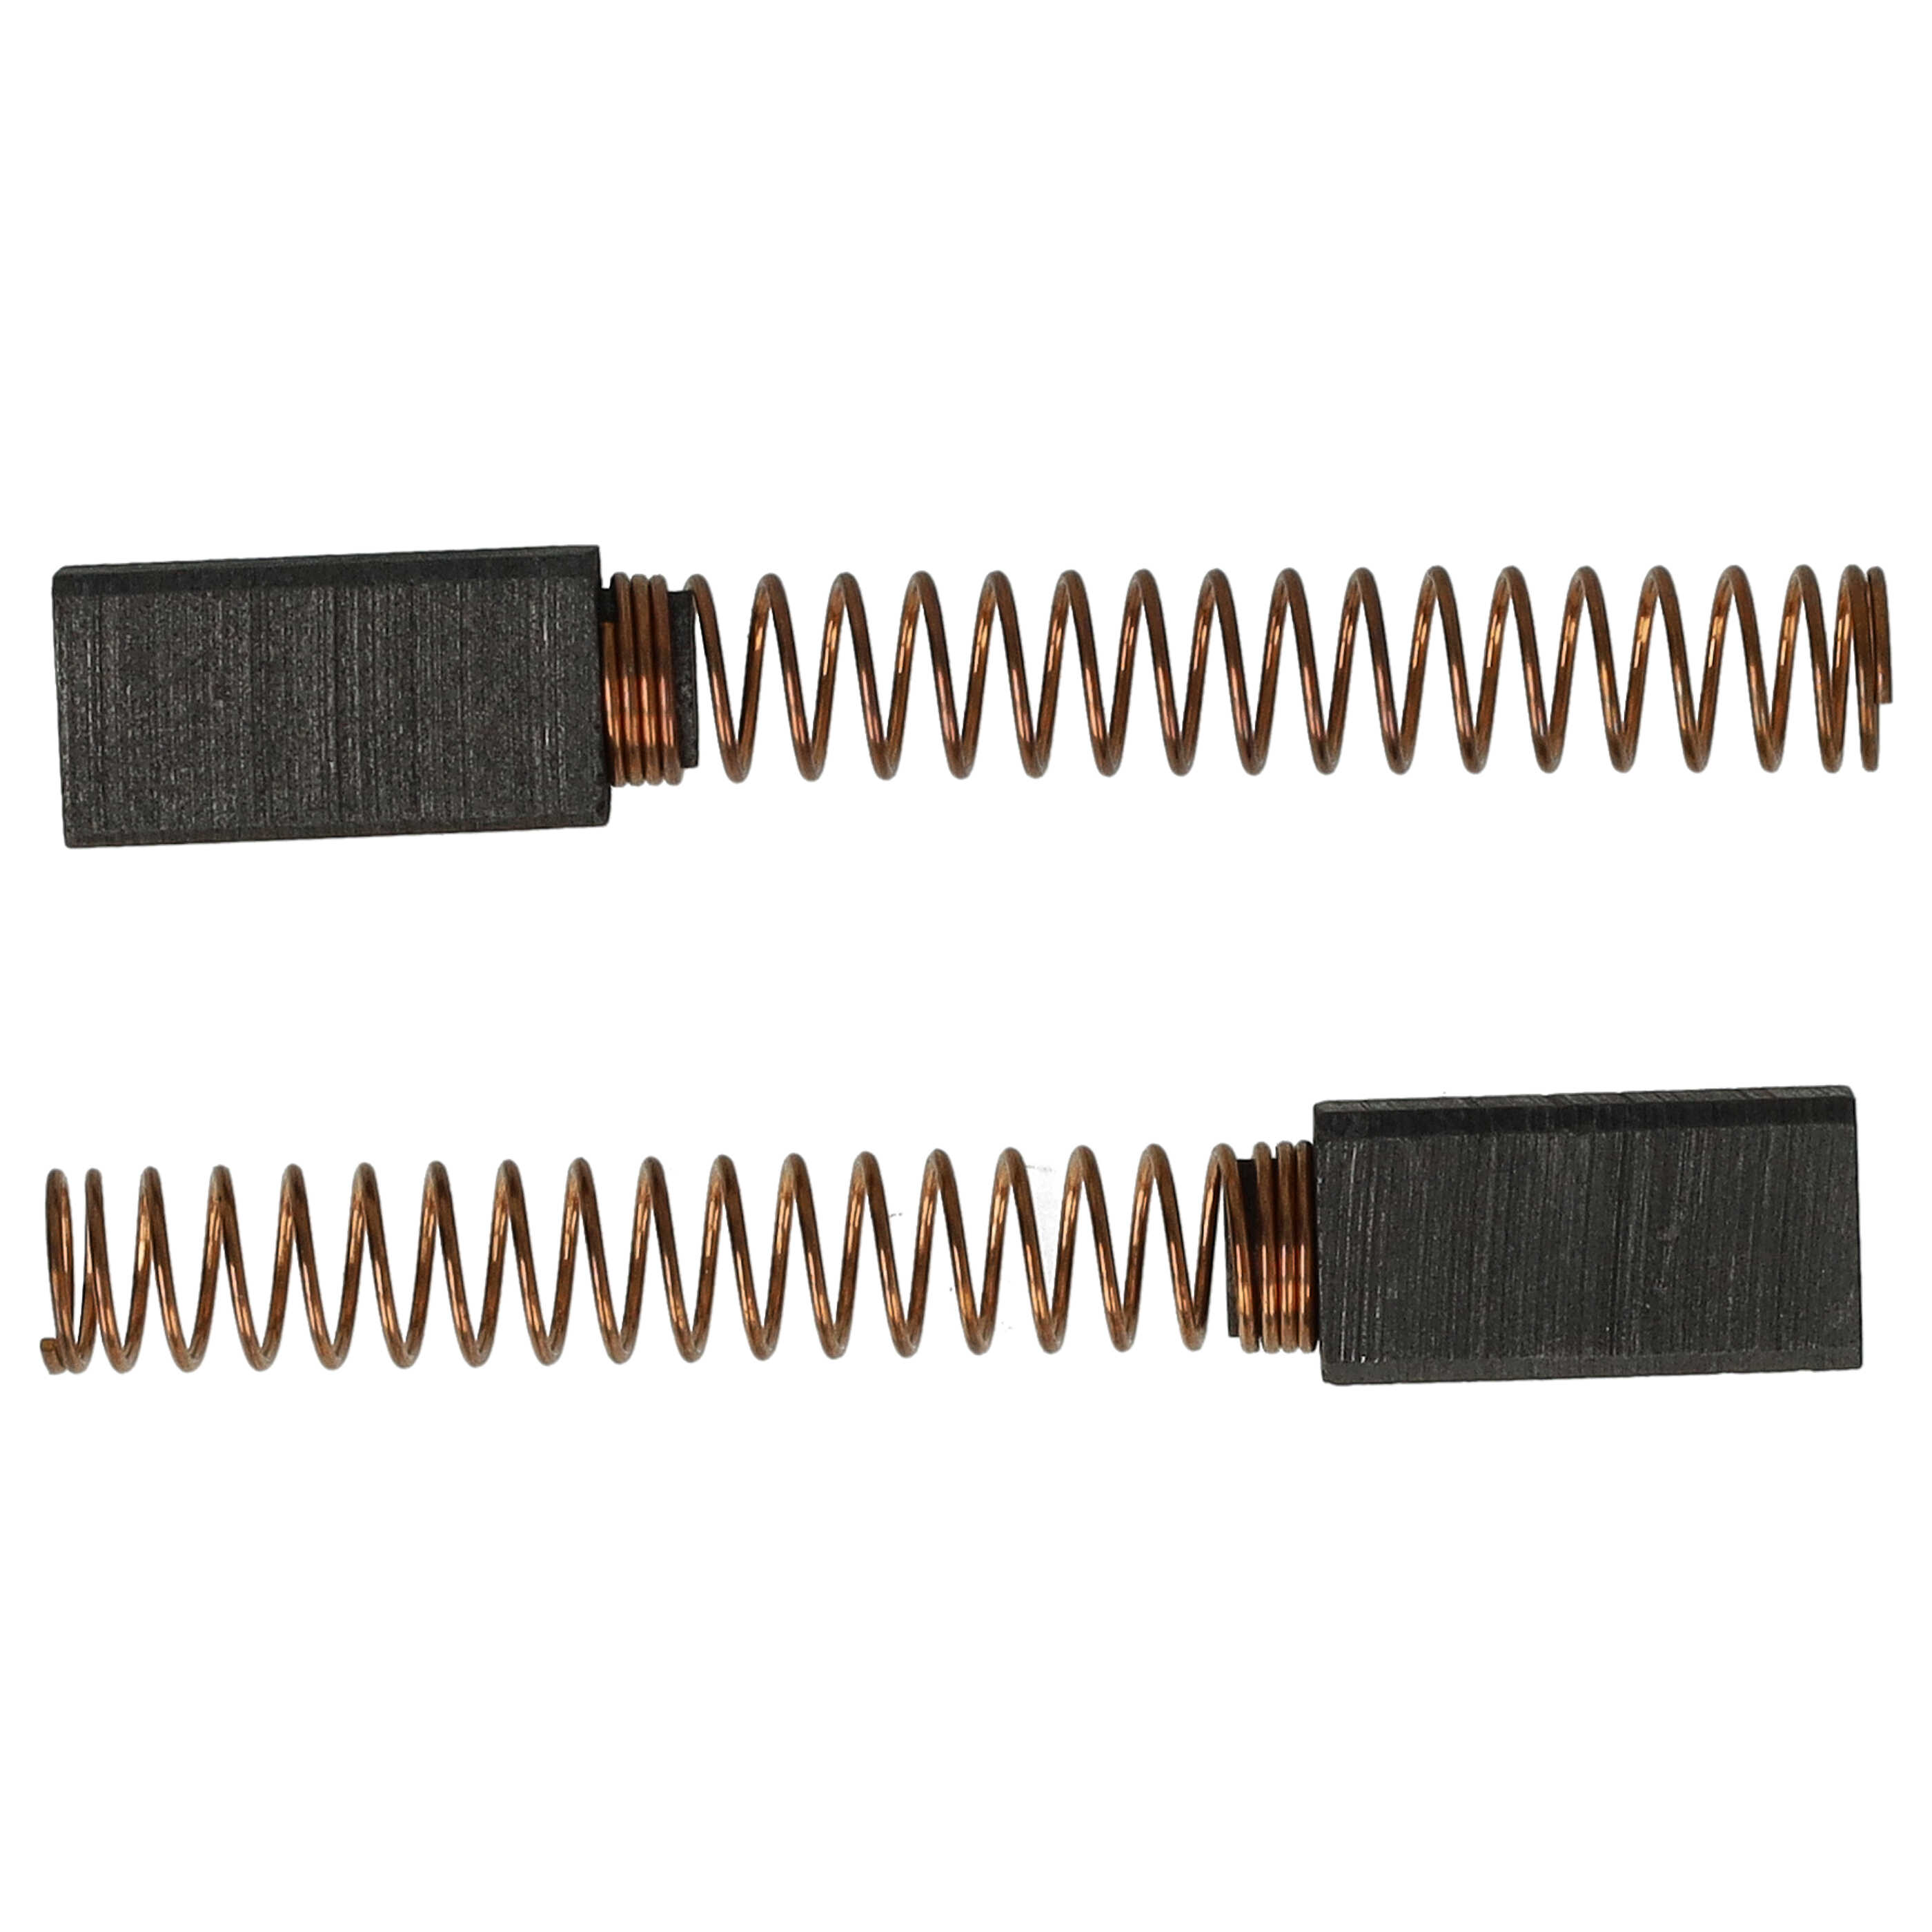 2x Carbon Brush as Replacement for Hitachi / Hikoki 312800 Electric Power Tools + Spring, 12 x 6 x 5mm